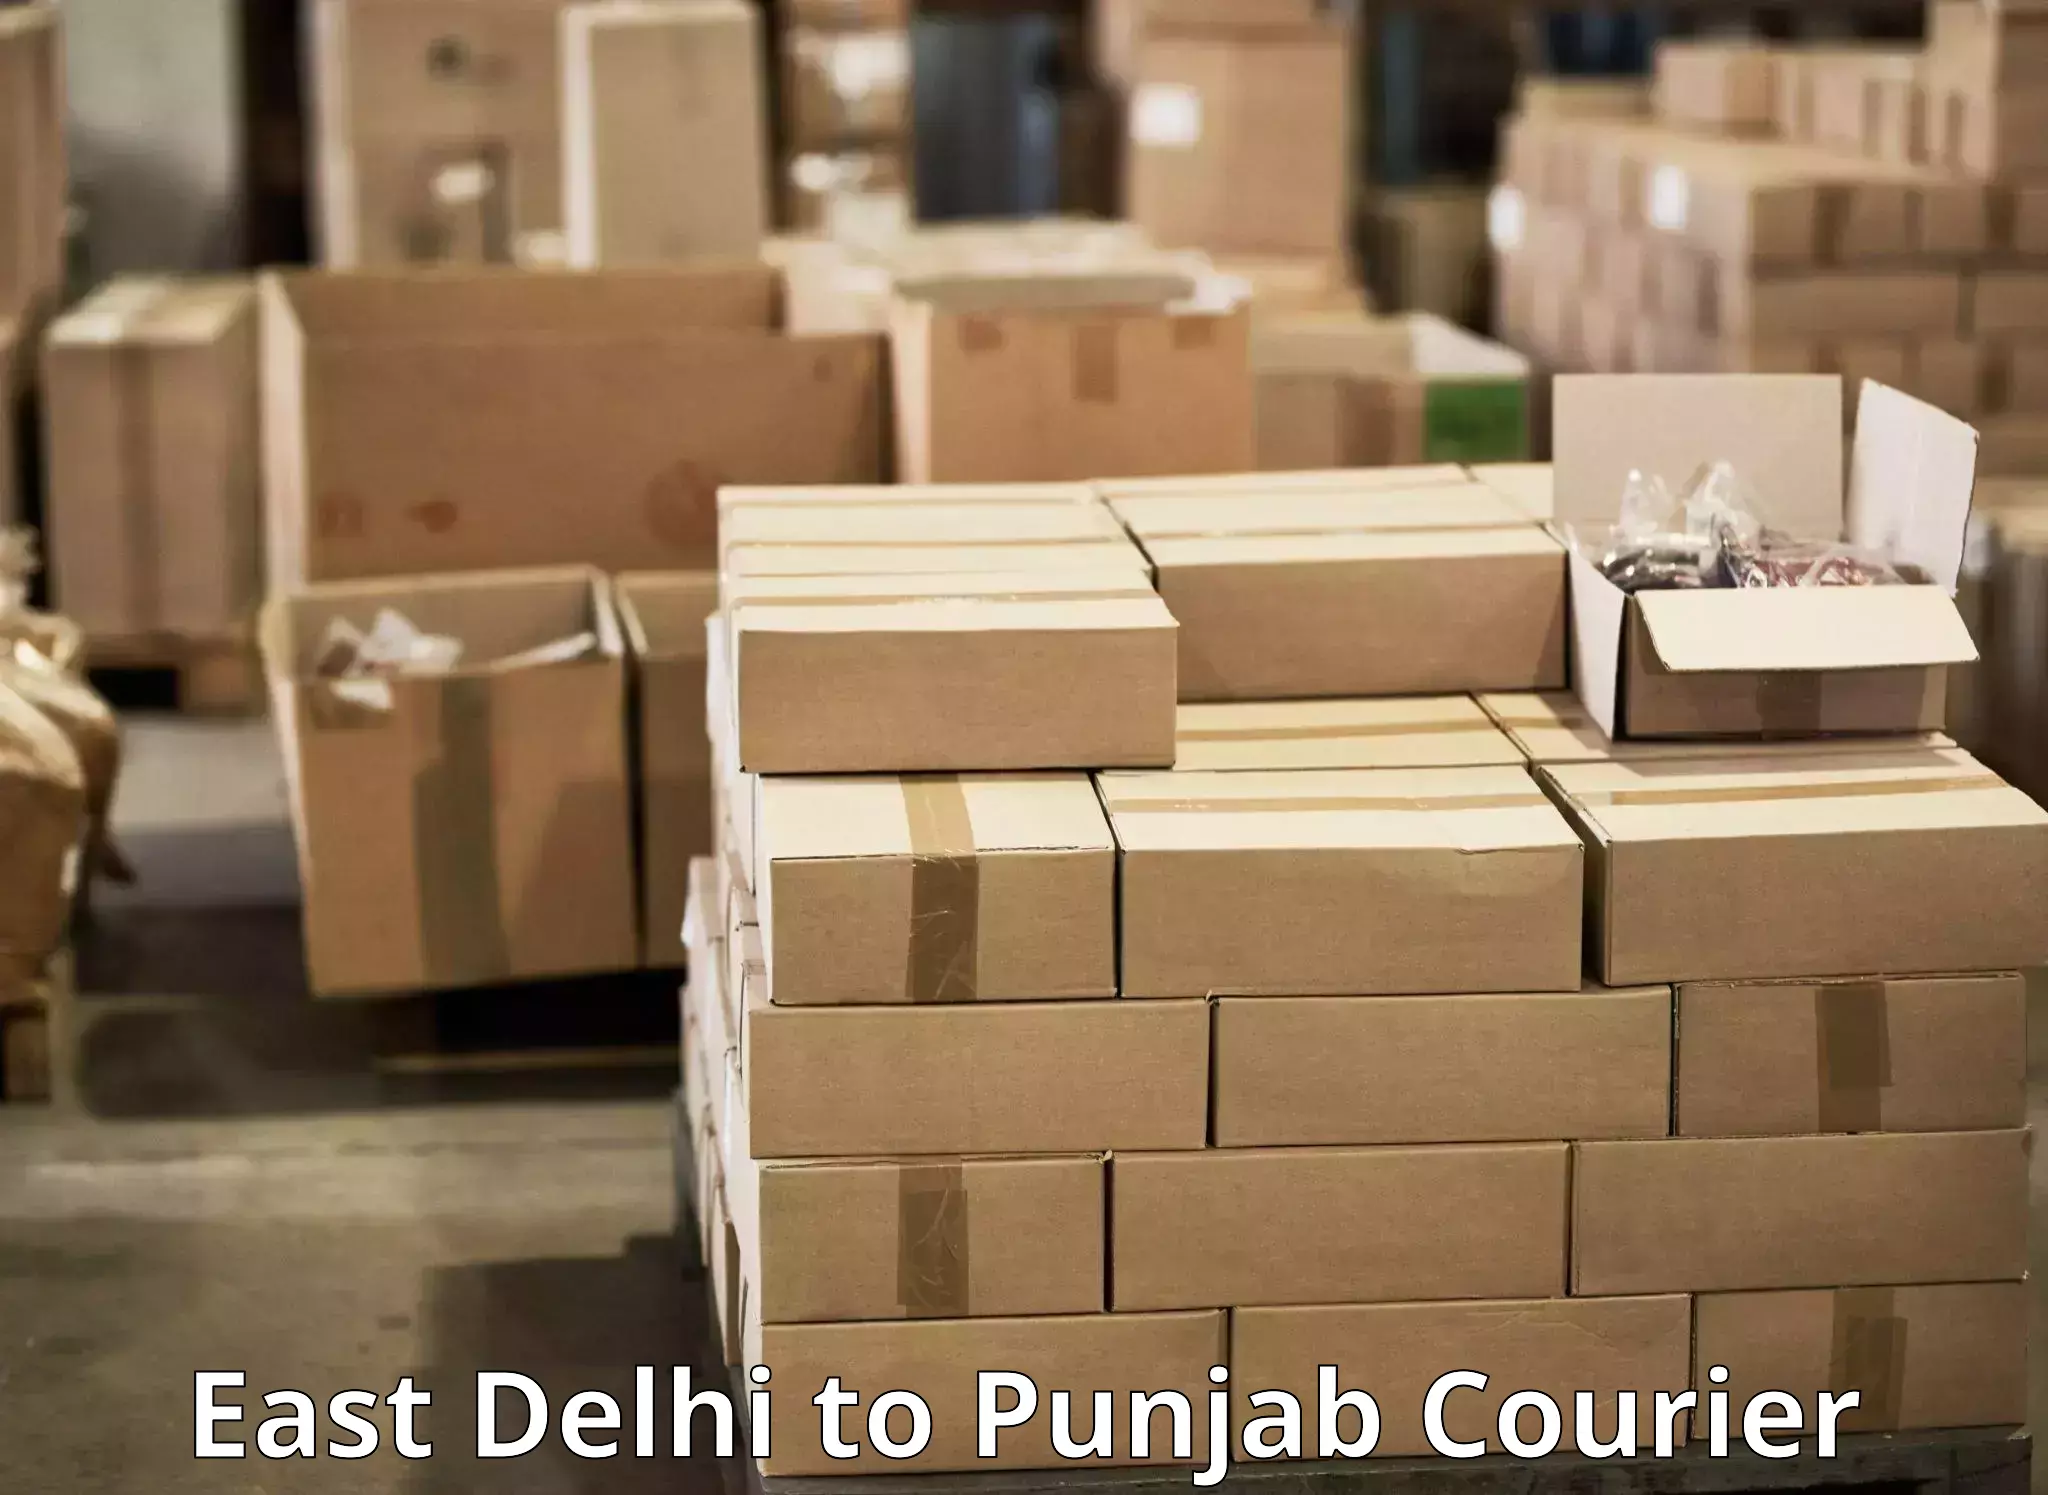 Express courier facilities East Delhi to IIT Ropar